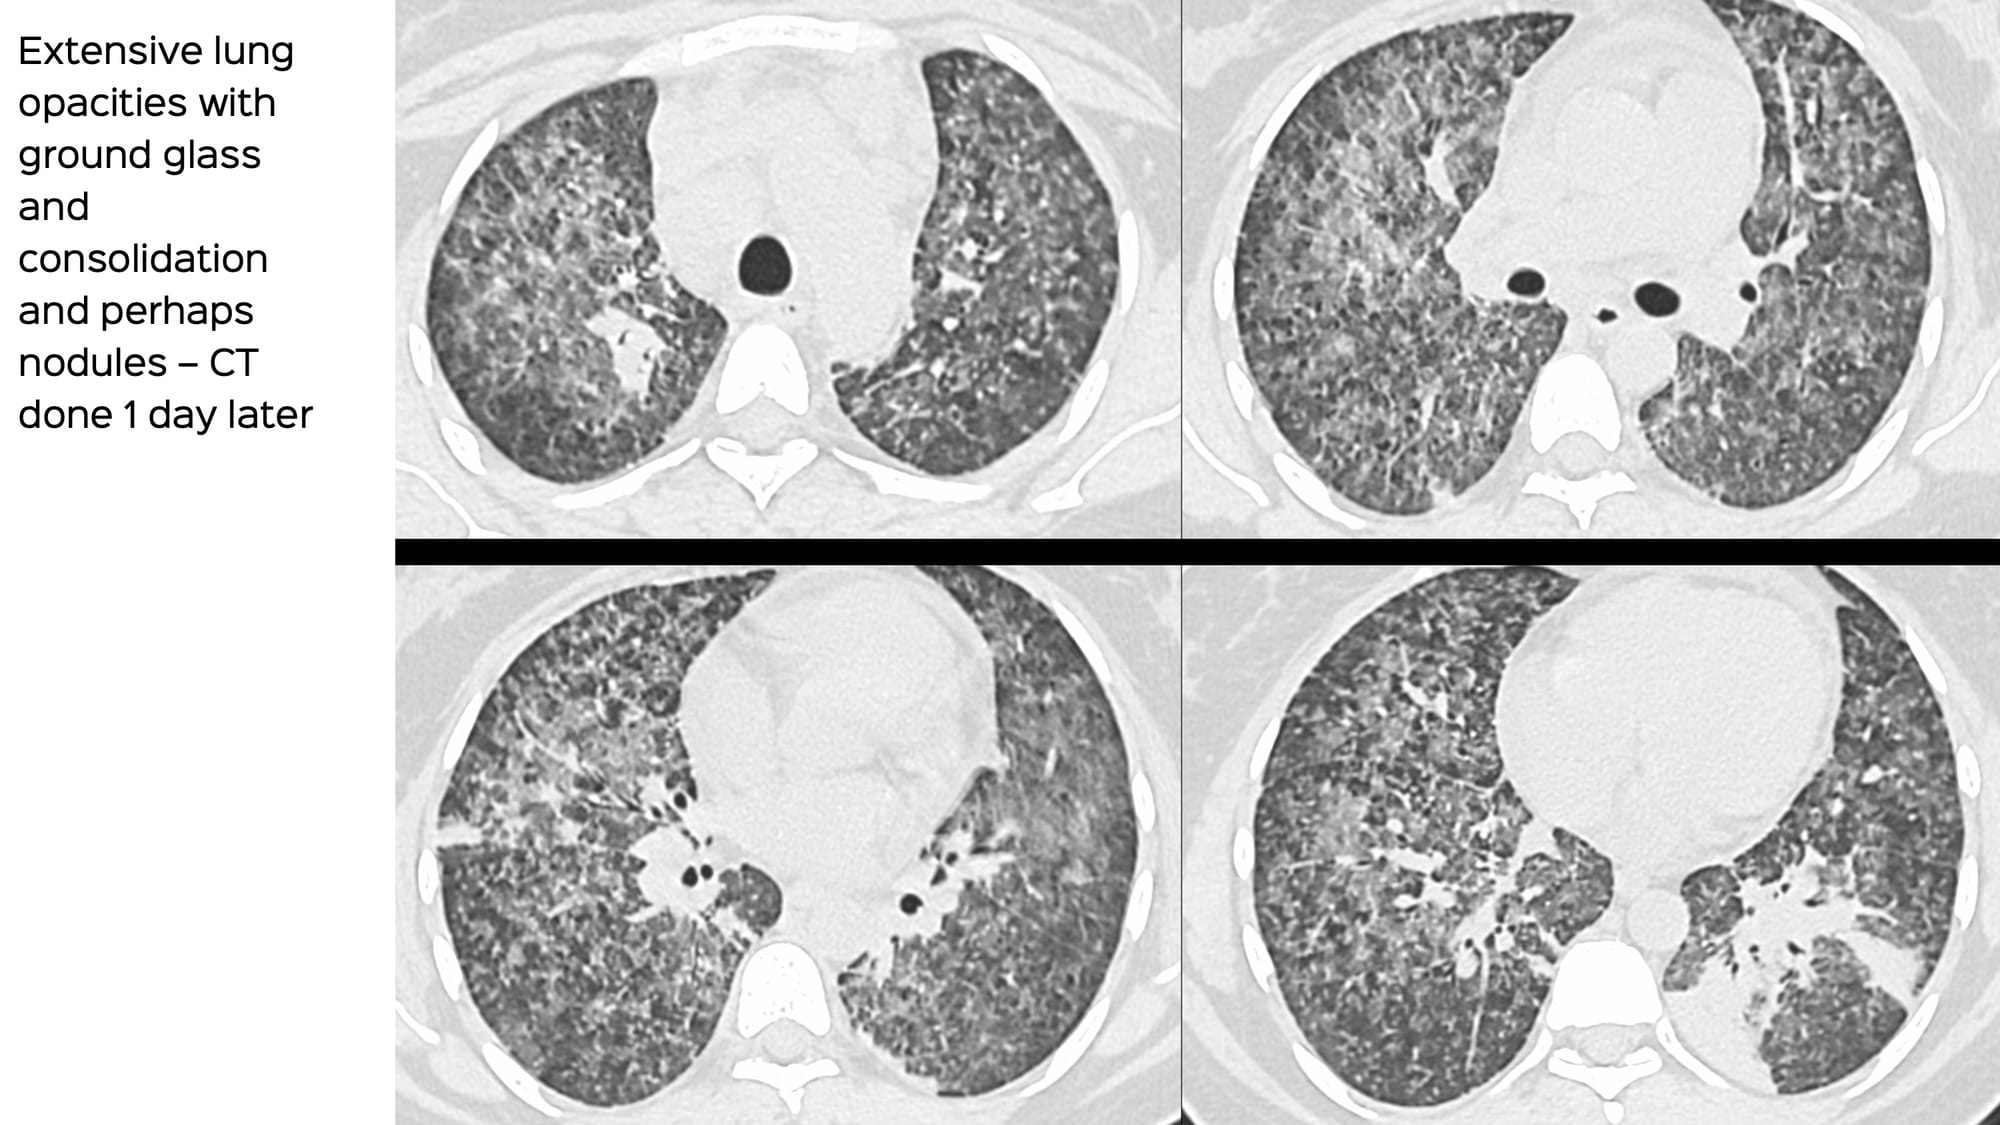 Case 97: How to Identify and Diagnose Miliary TB as a Cause of ARDS